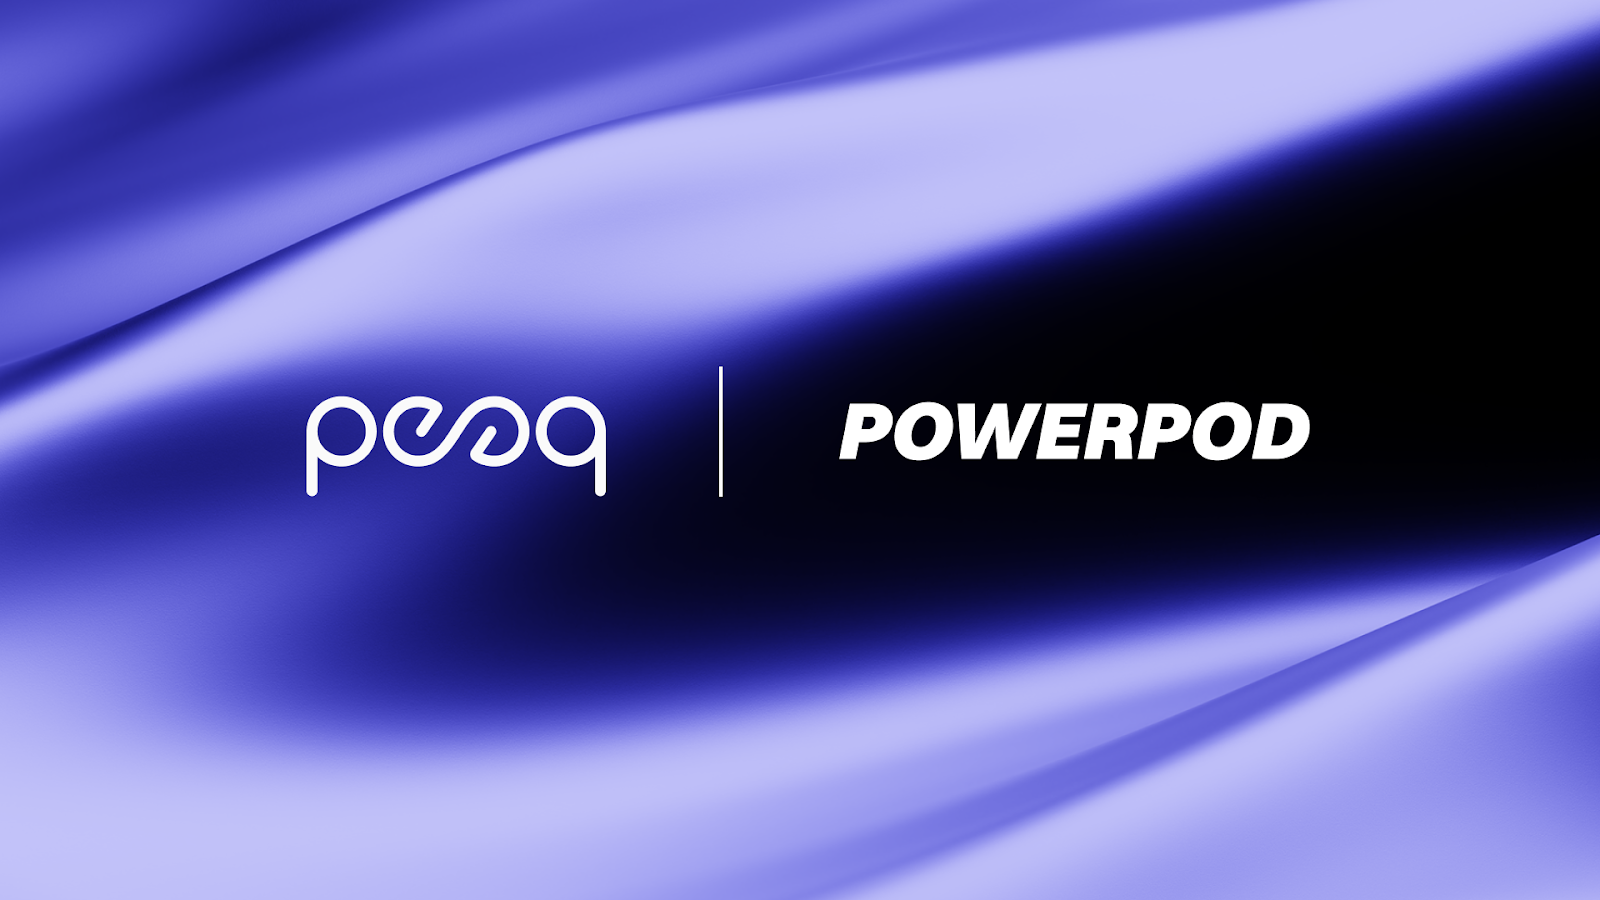 PowerPod taps peaq as the layer-1 backbone for its decentralized physical infrastructure network of community-owned vehicle chargers.